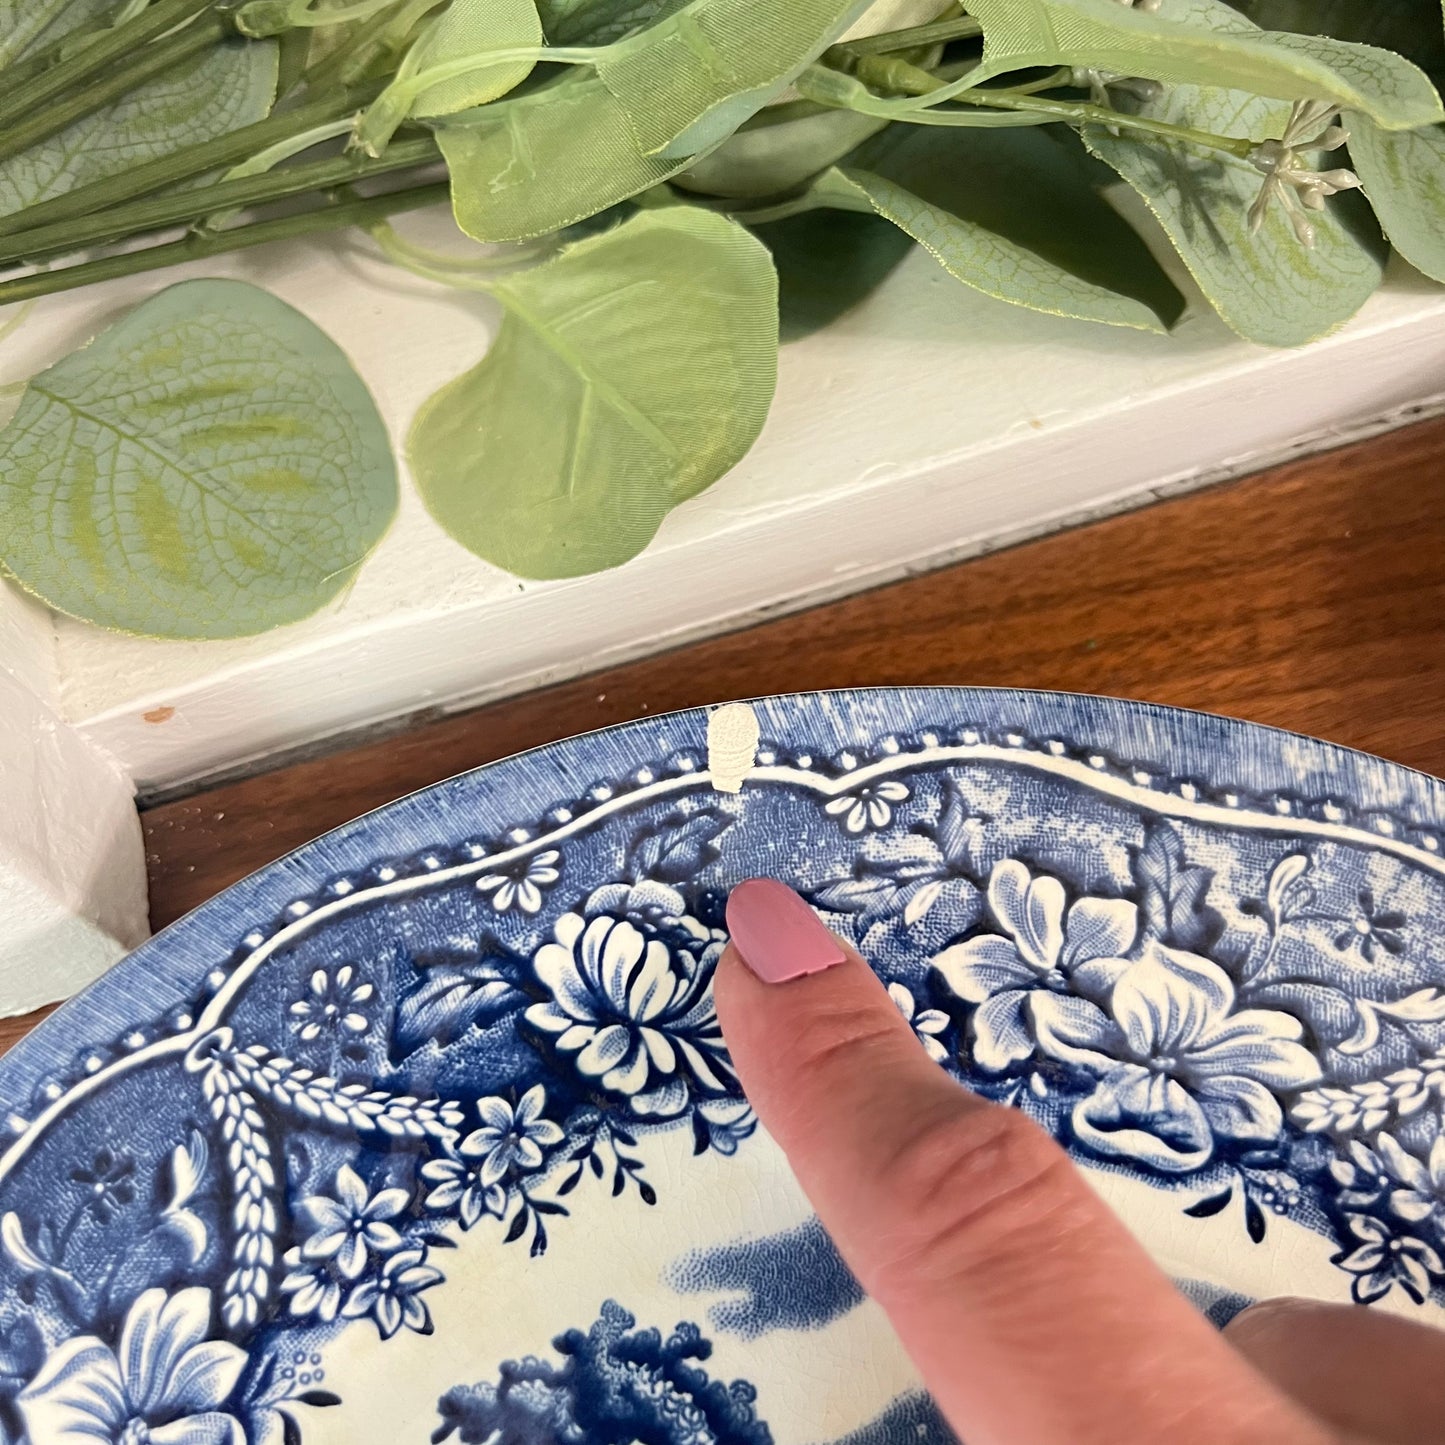 Barratts 'Old Castle' Blue and White Transferware 9 " Plates, Blue Transferware, Vintage Blue China - Set of 6